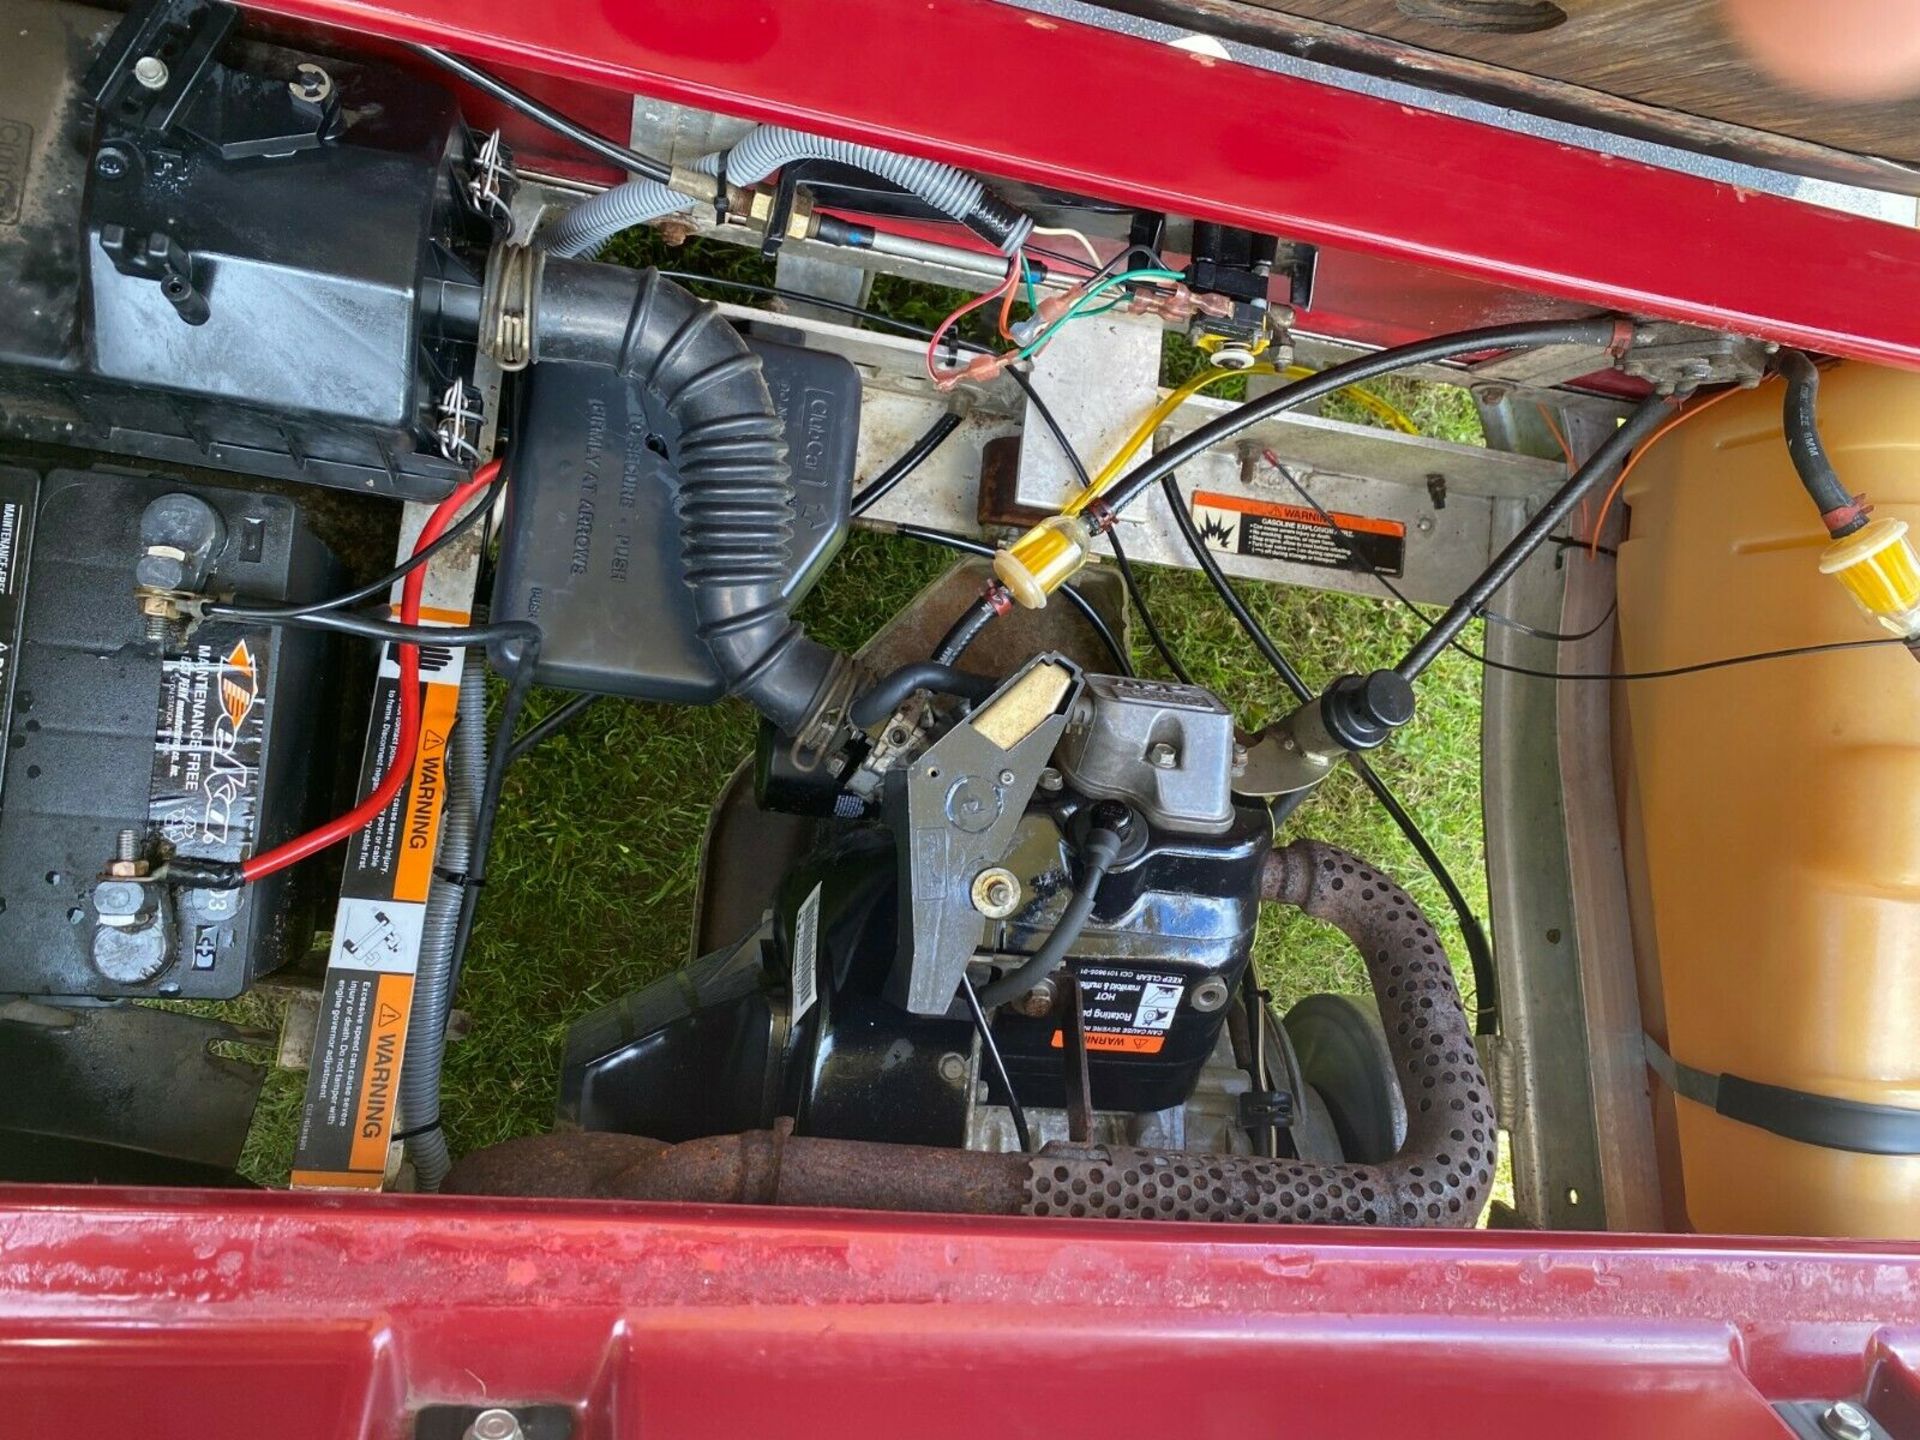 CLUB CAR GOLF BUGGY, 1 OWNER FROM NEW, PETROL, ALUMINIUM CHASSIS *PLUS VAT* - Image 7 of 7